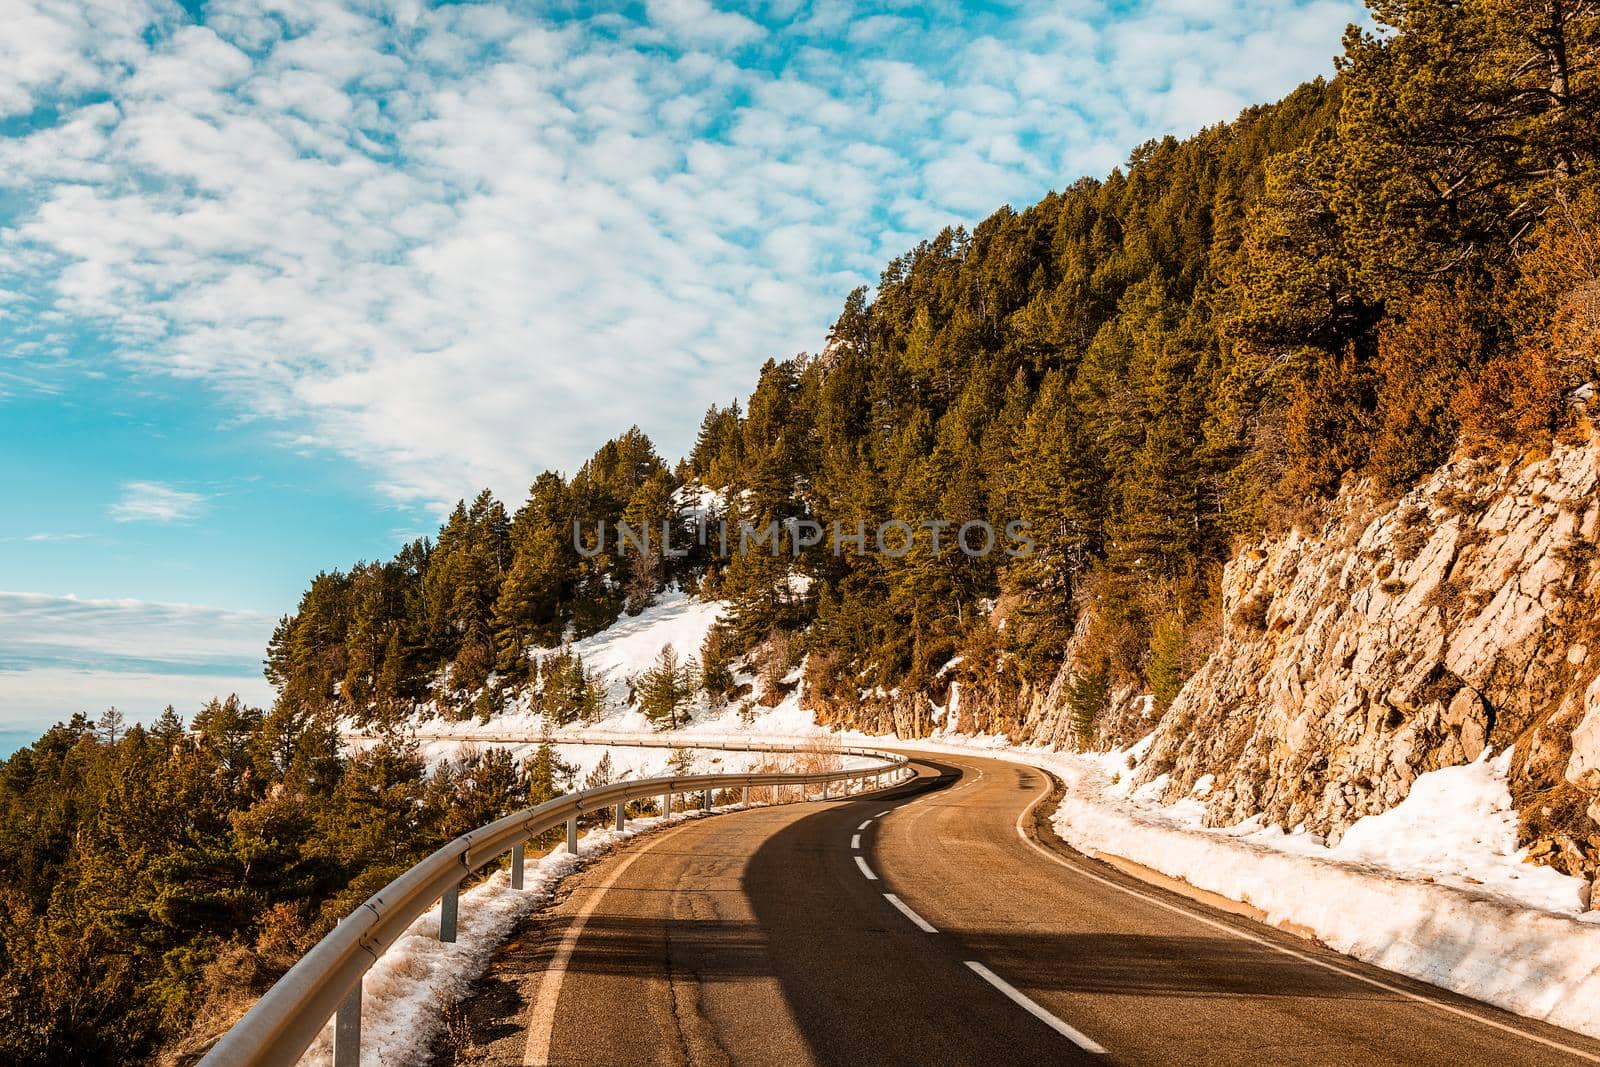 winding road in the mountains with snow in the gutter is lost in the distance, the road is surrounded by forests and the sky is clear